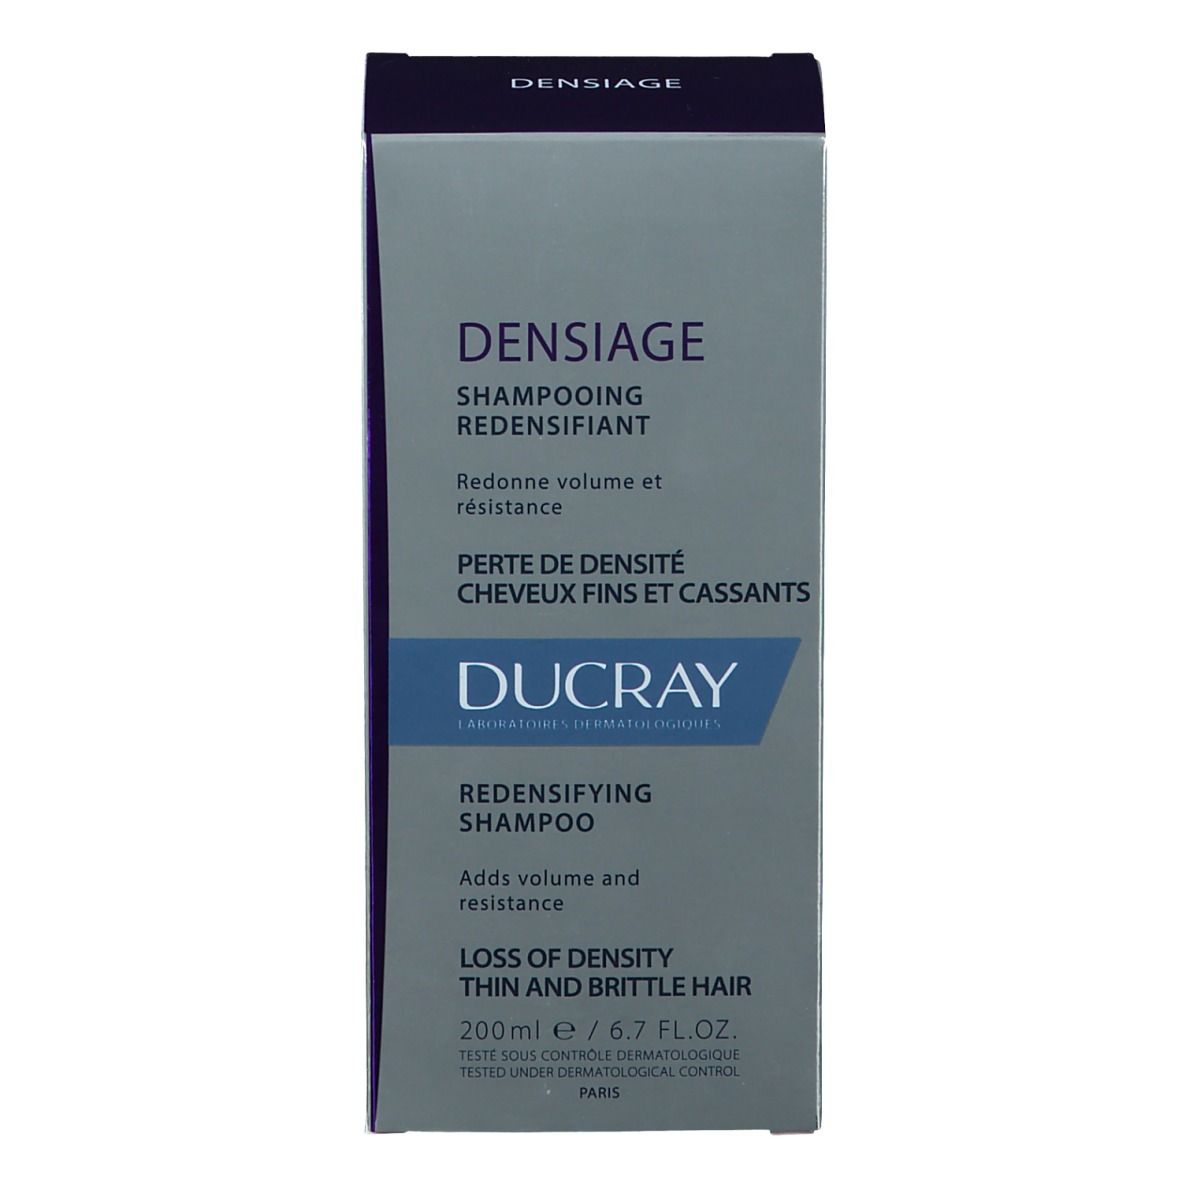 DUCRAY DENSIAGE Shampooing Redensifiant